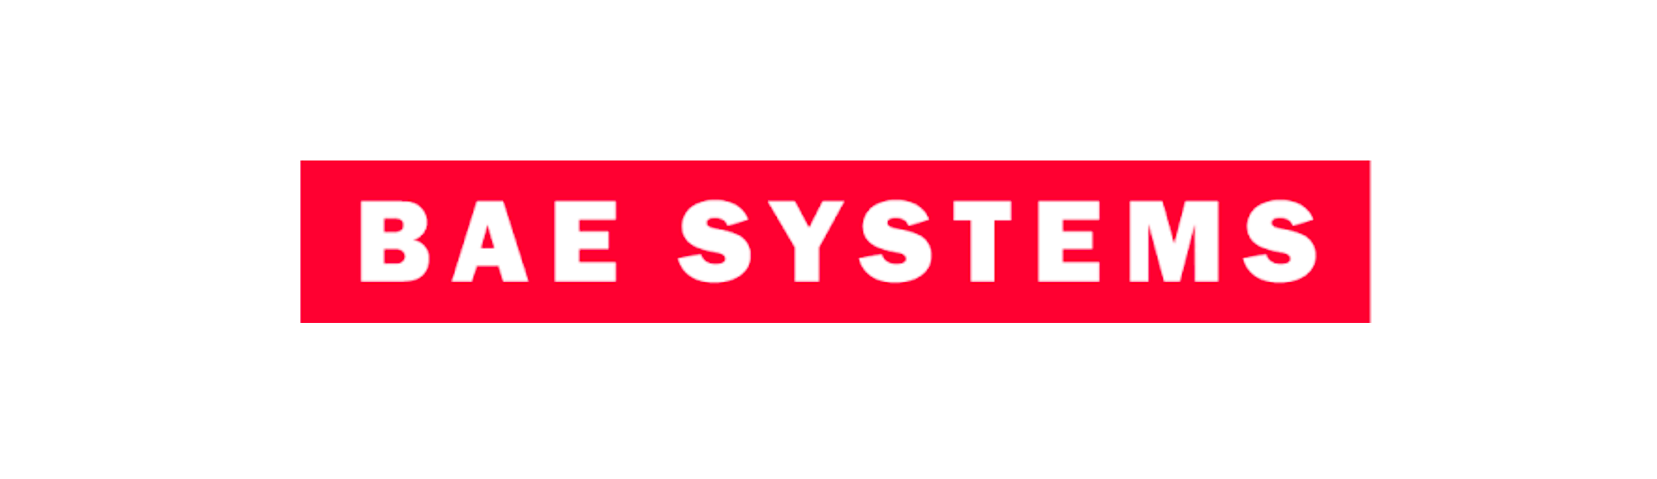 network_bae-systems